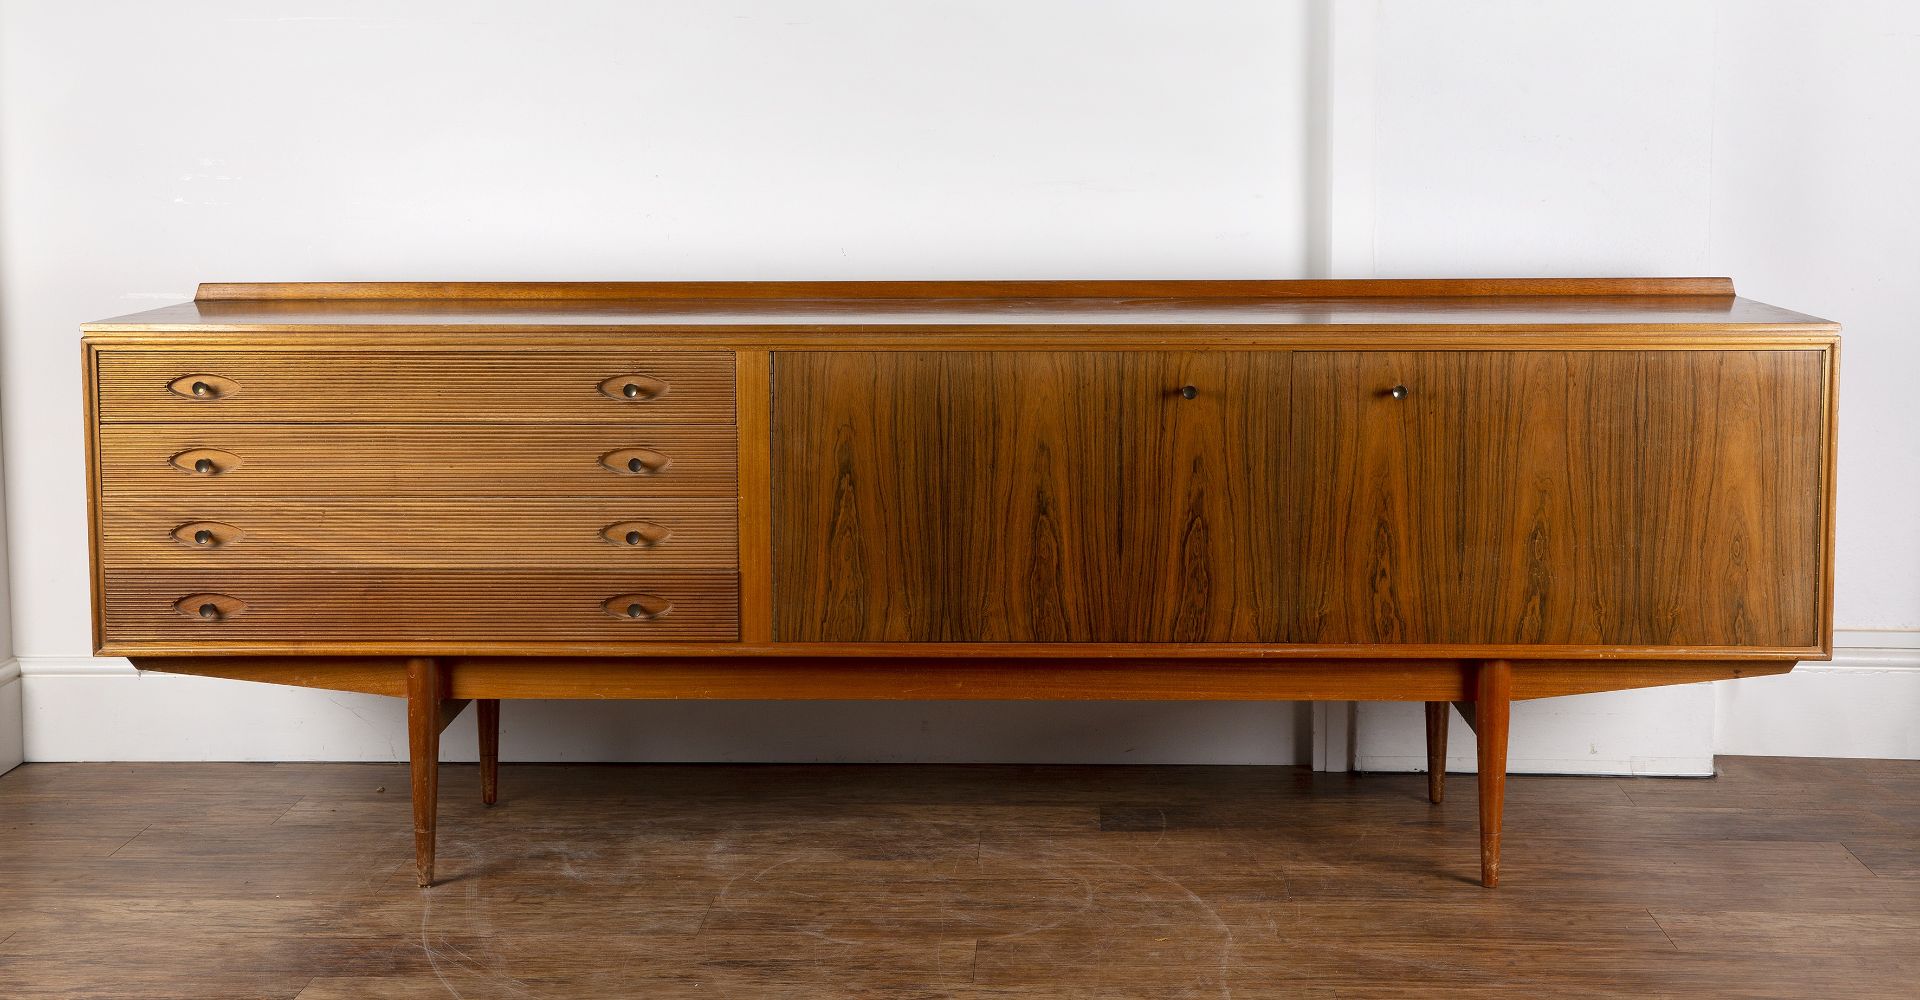 Robert Heritage for Archie Shine Ltd walnut and rosewood veneered 'Hamilton' sideboard, four drawers